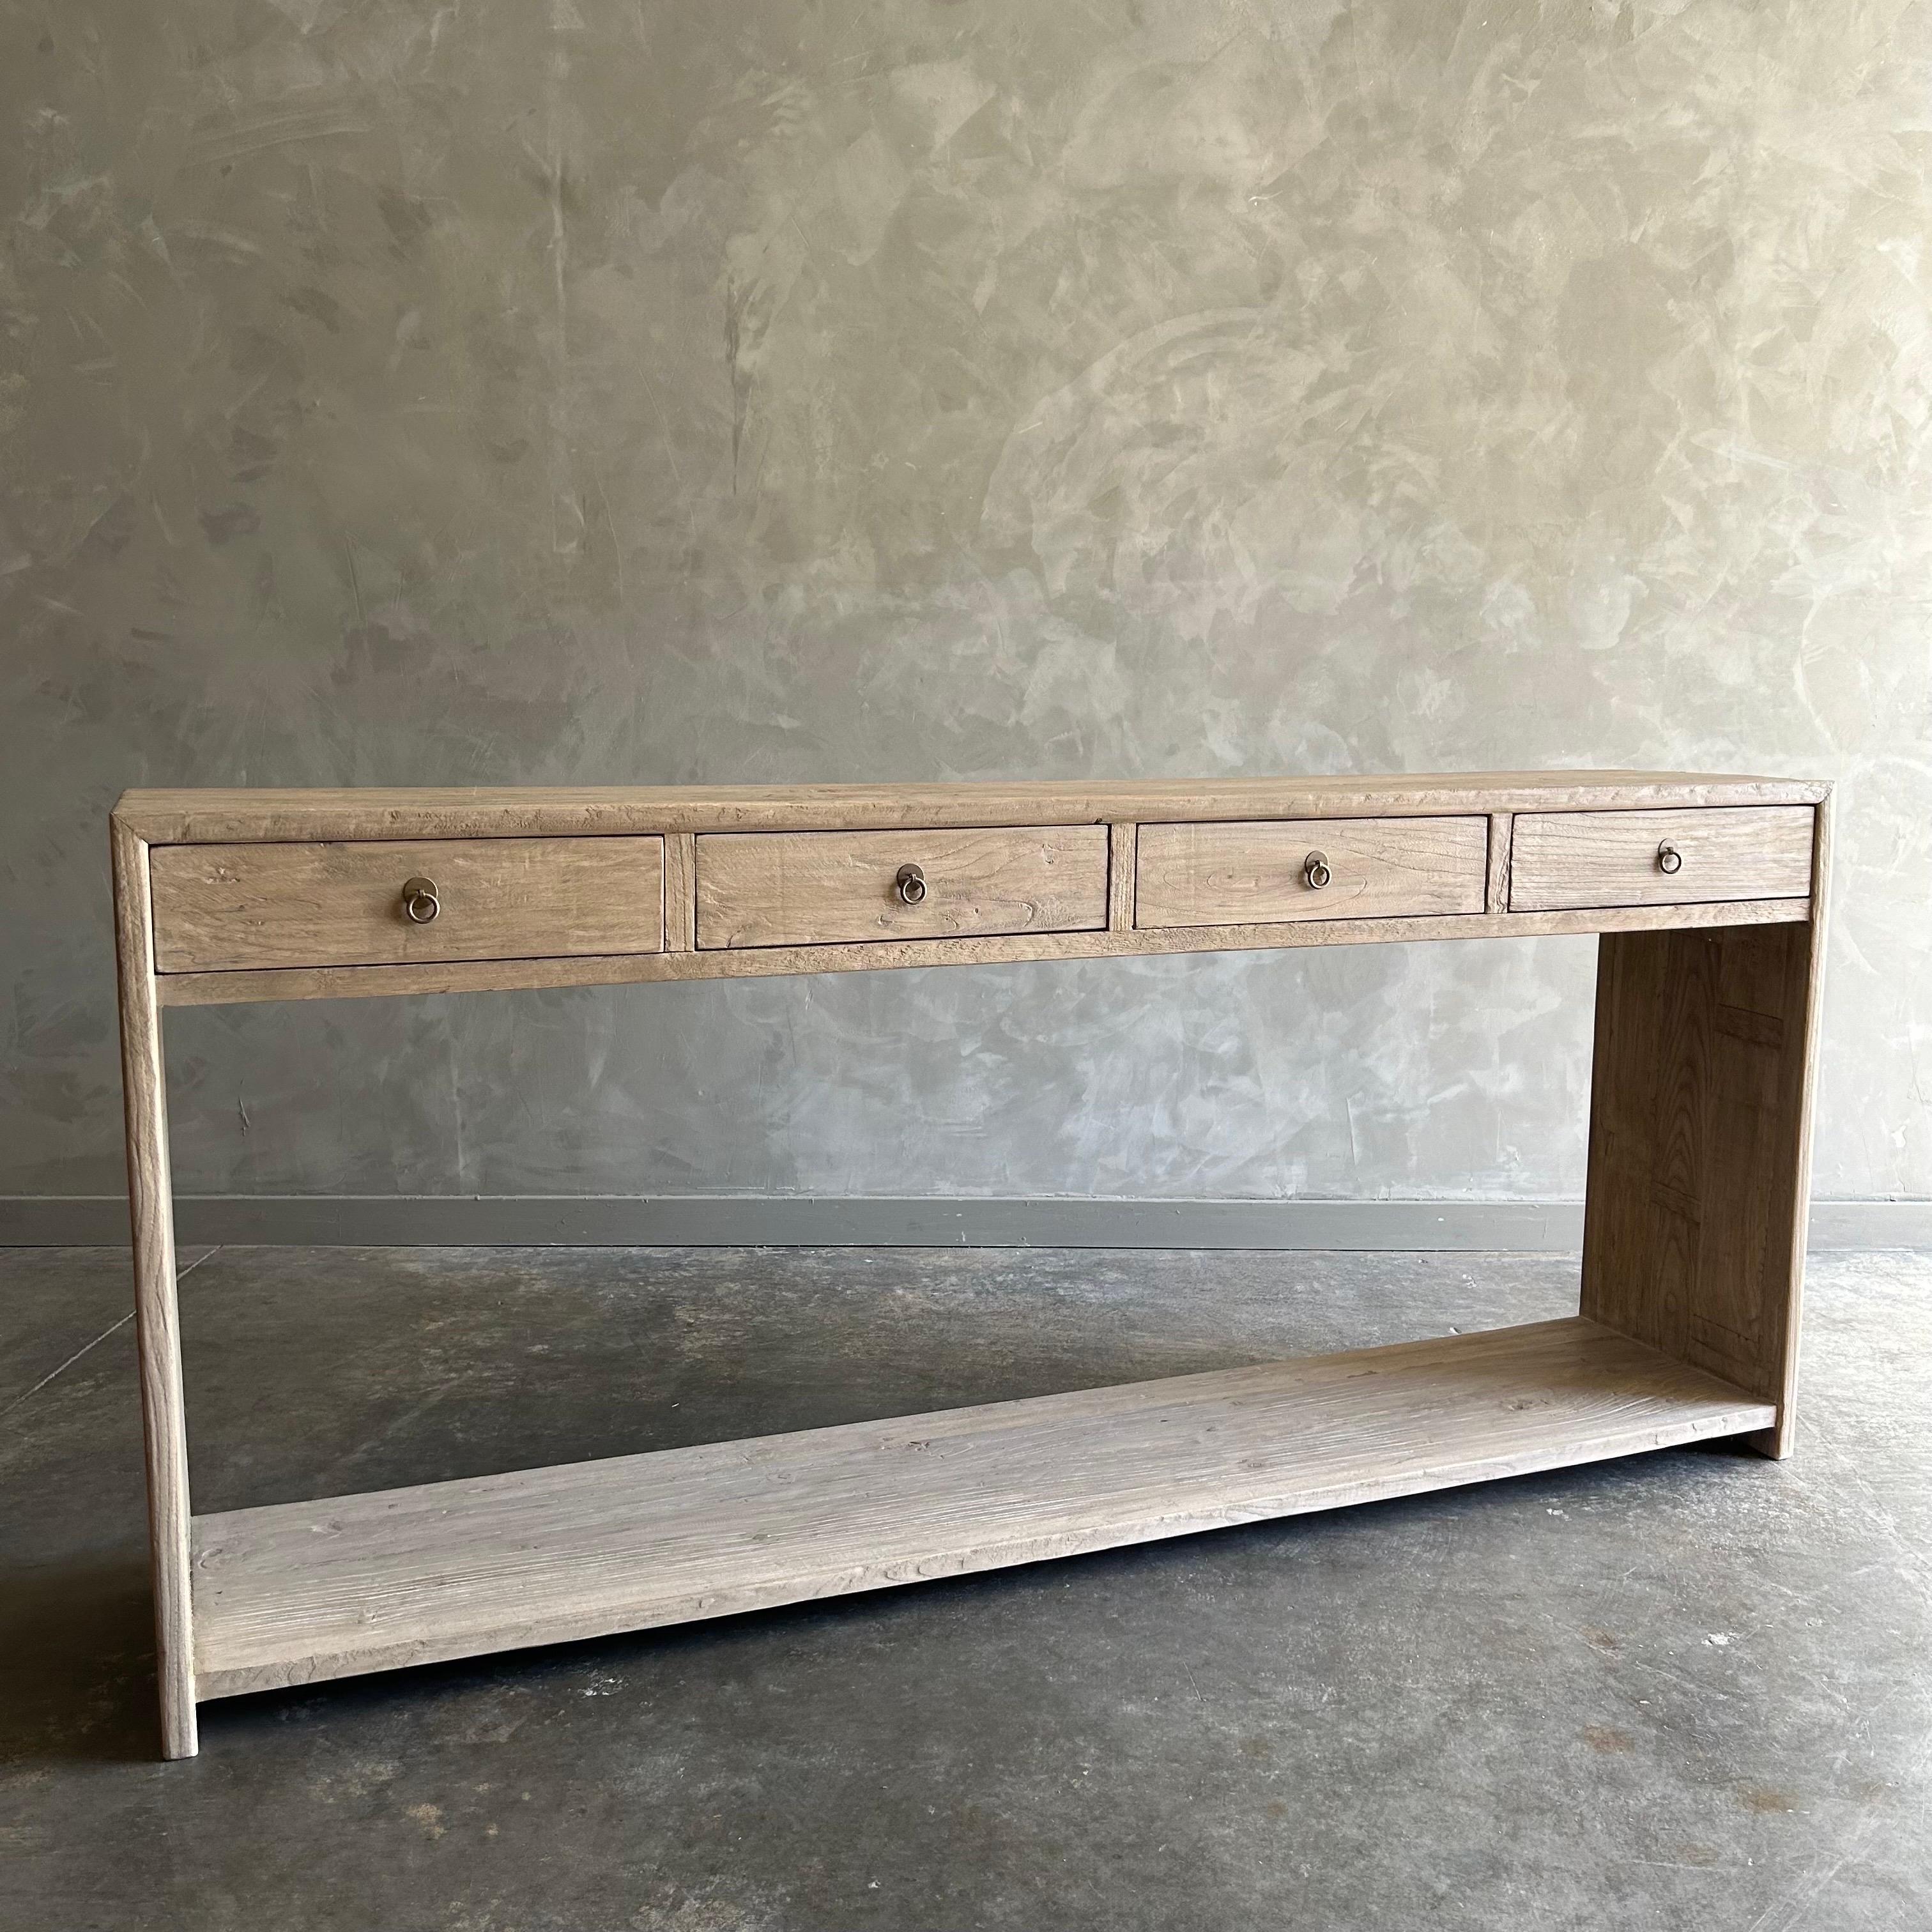 Elm Wood Console Table with Drawer in Natural Finish 80